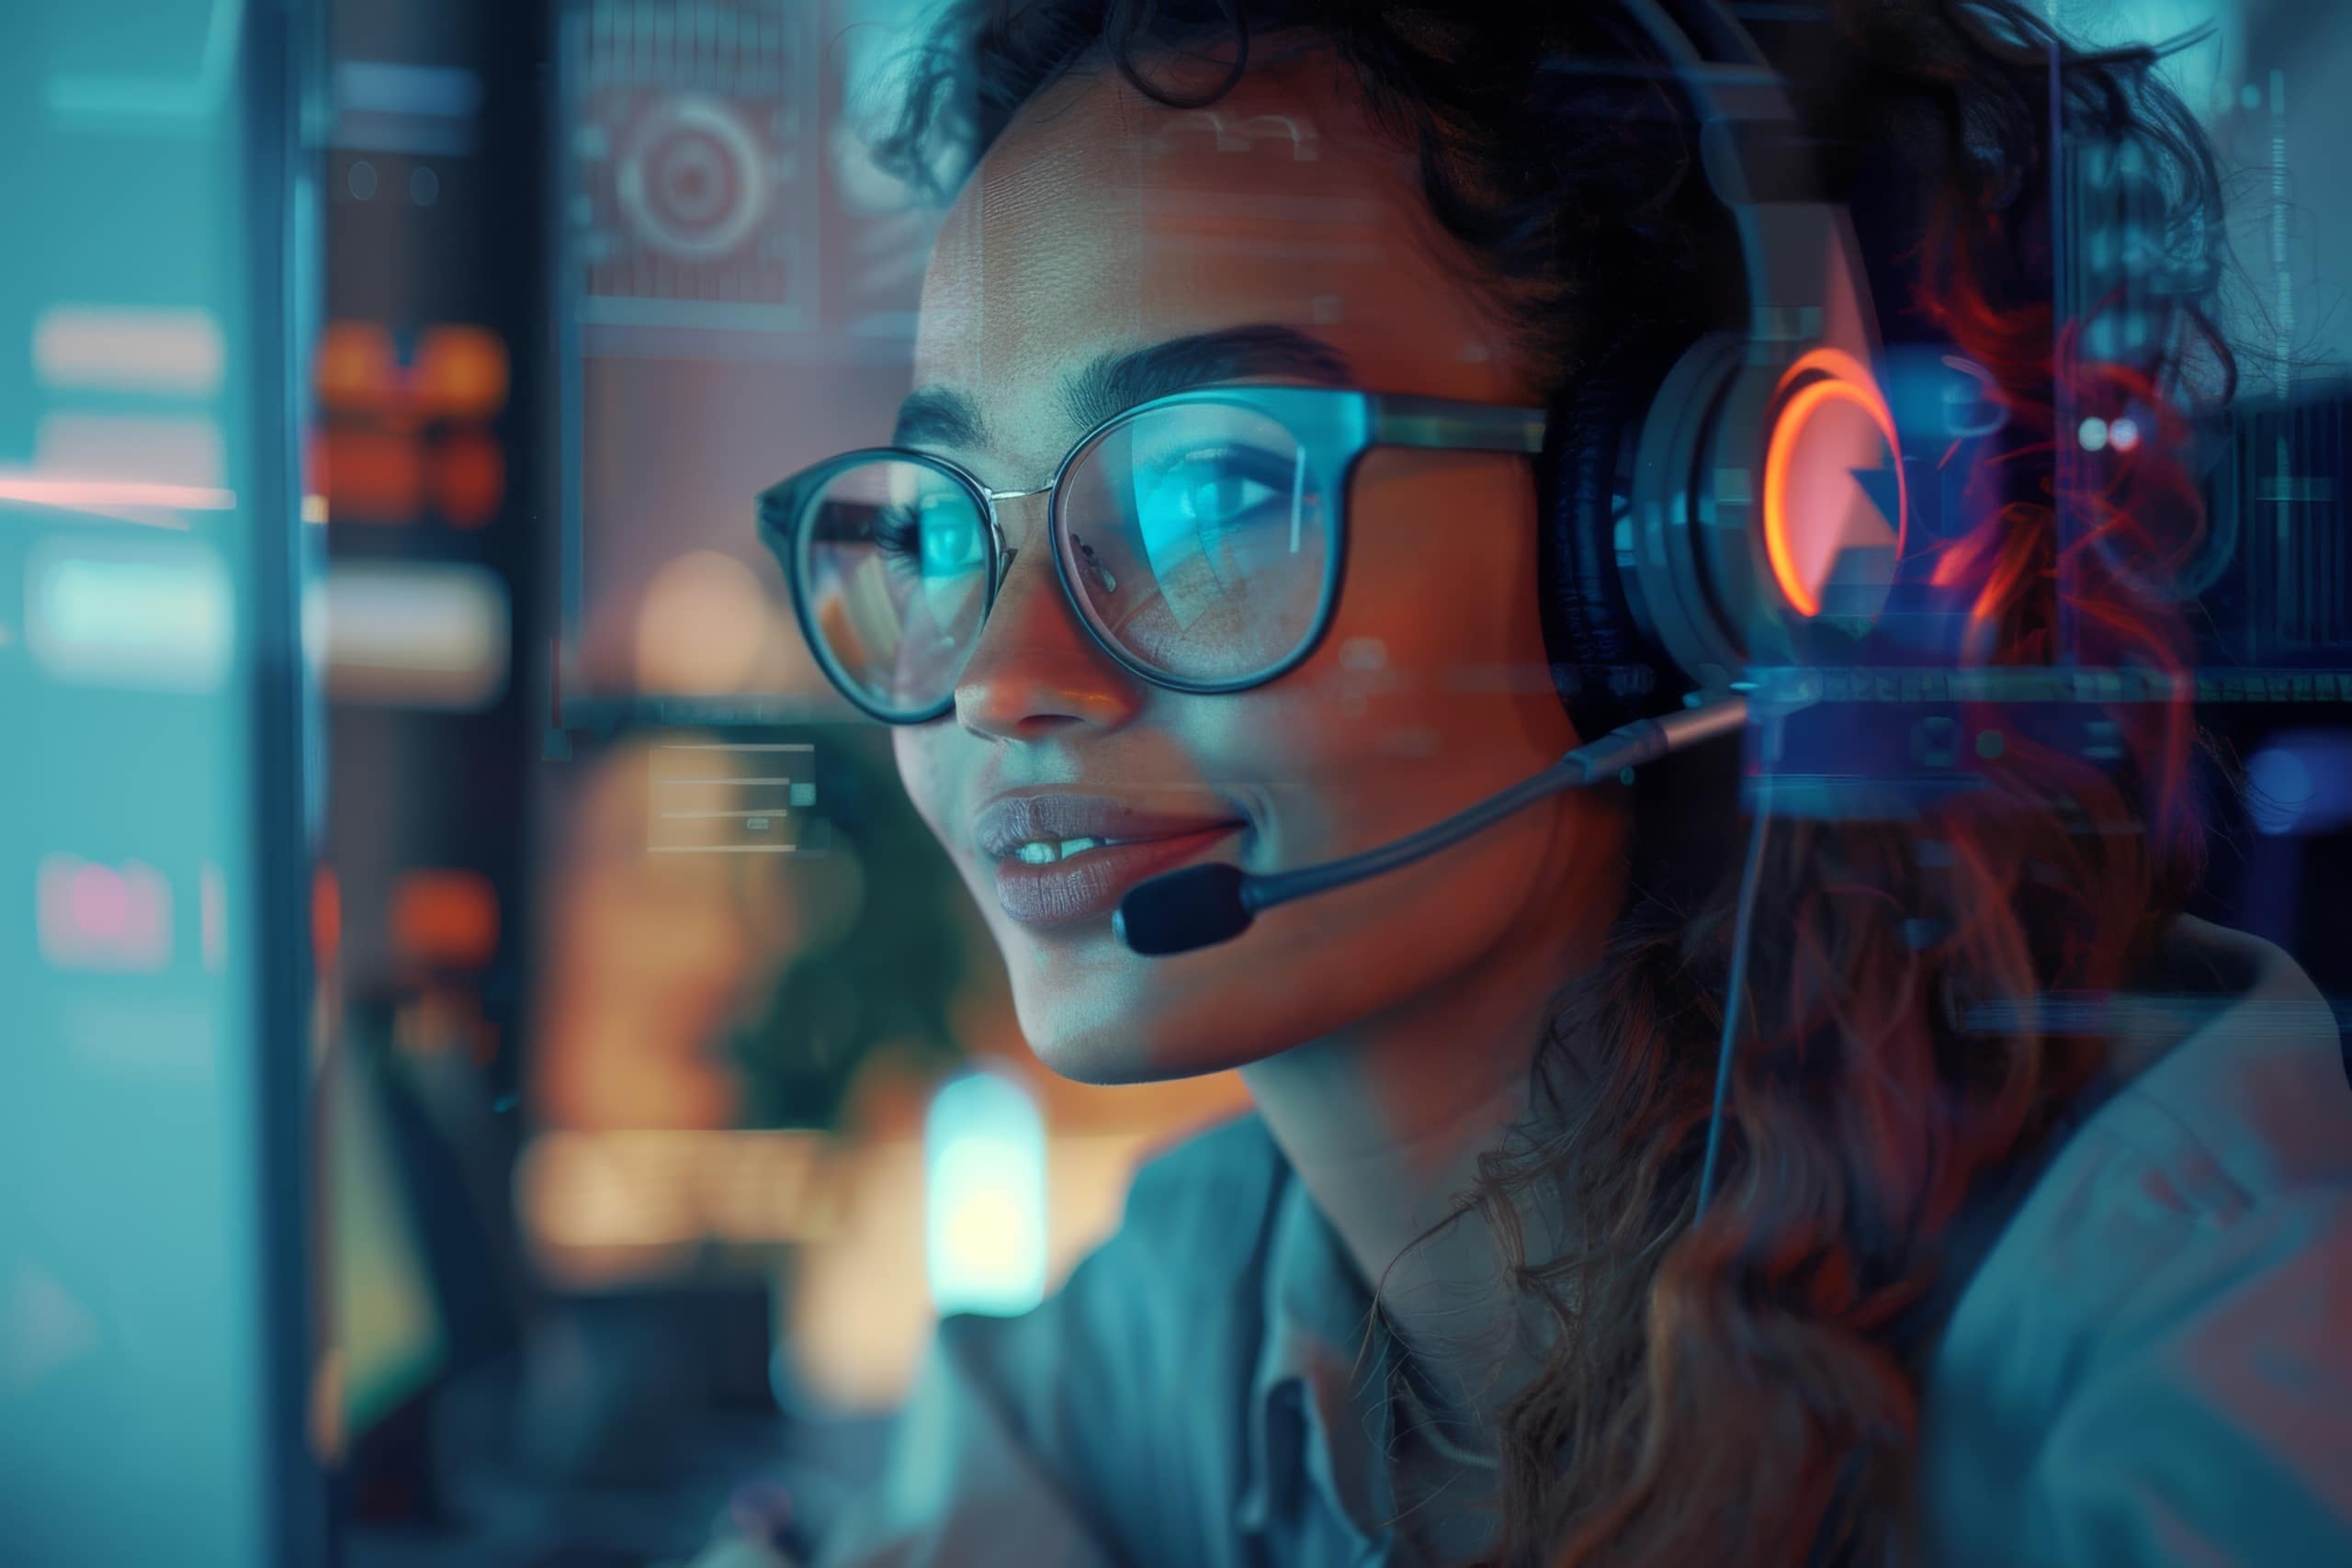 In a modern office, a cheerful woman wearing glasses and a headset provides customer service using the latest technology in a call center setting She appears professional and engaged